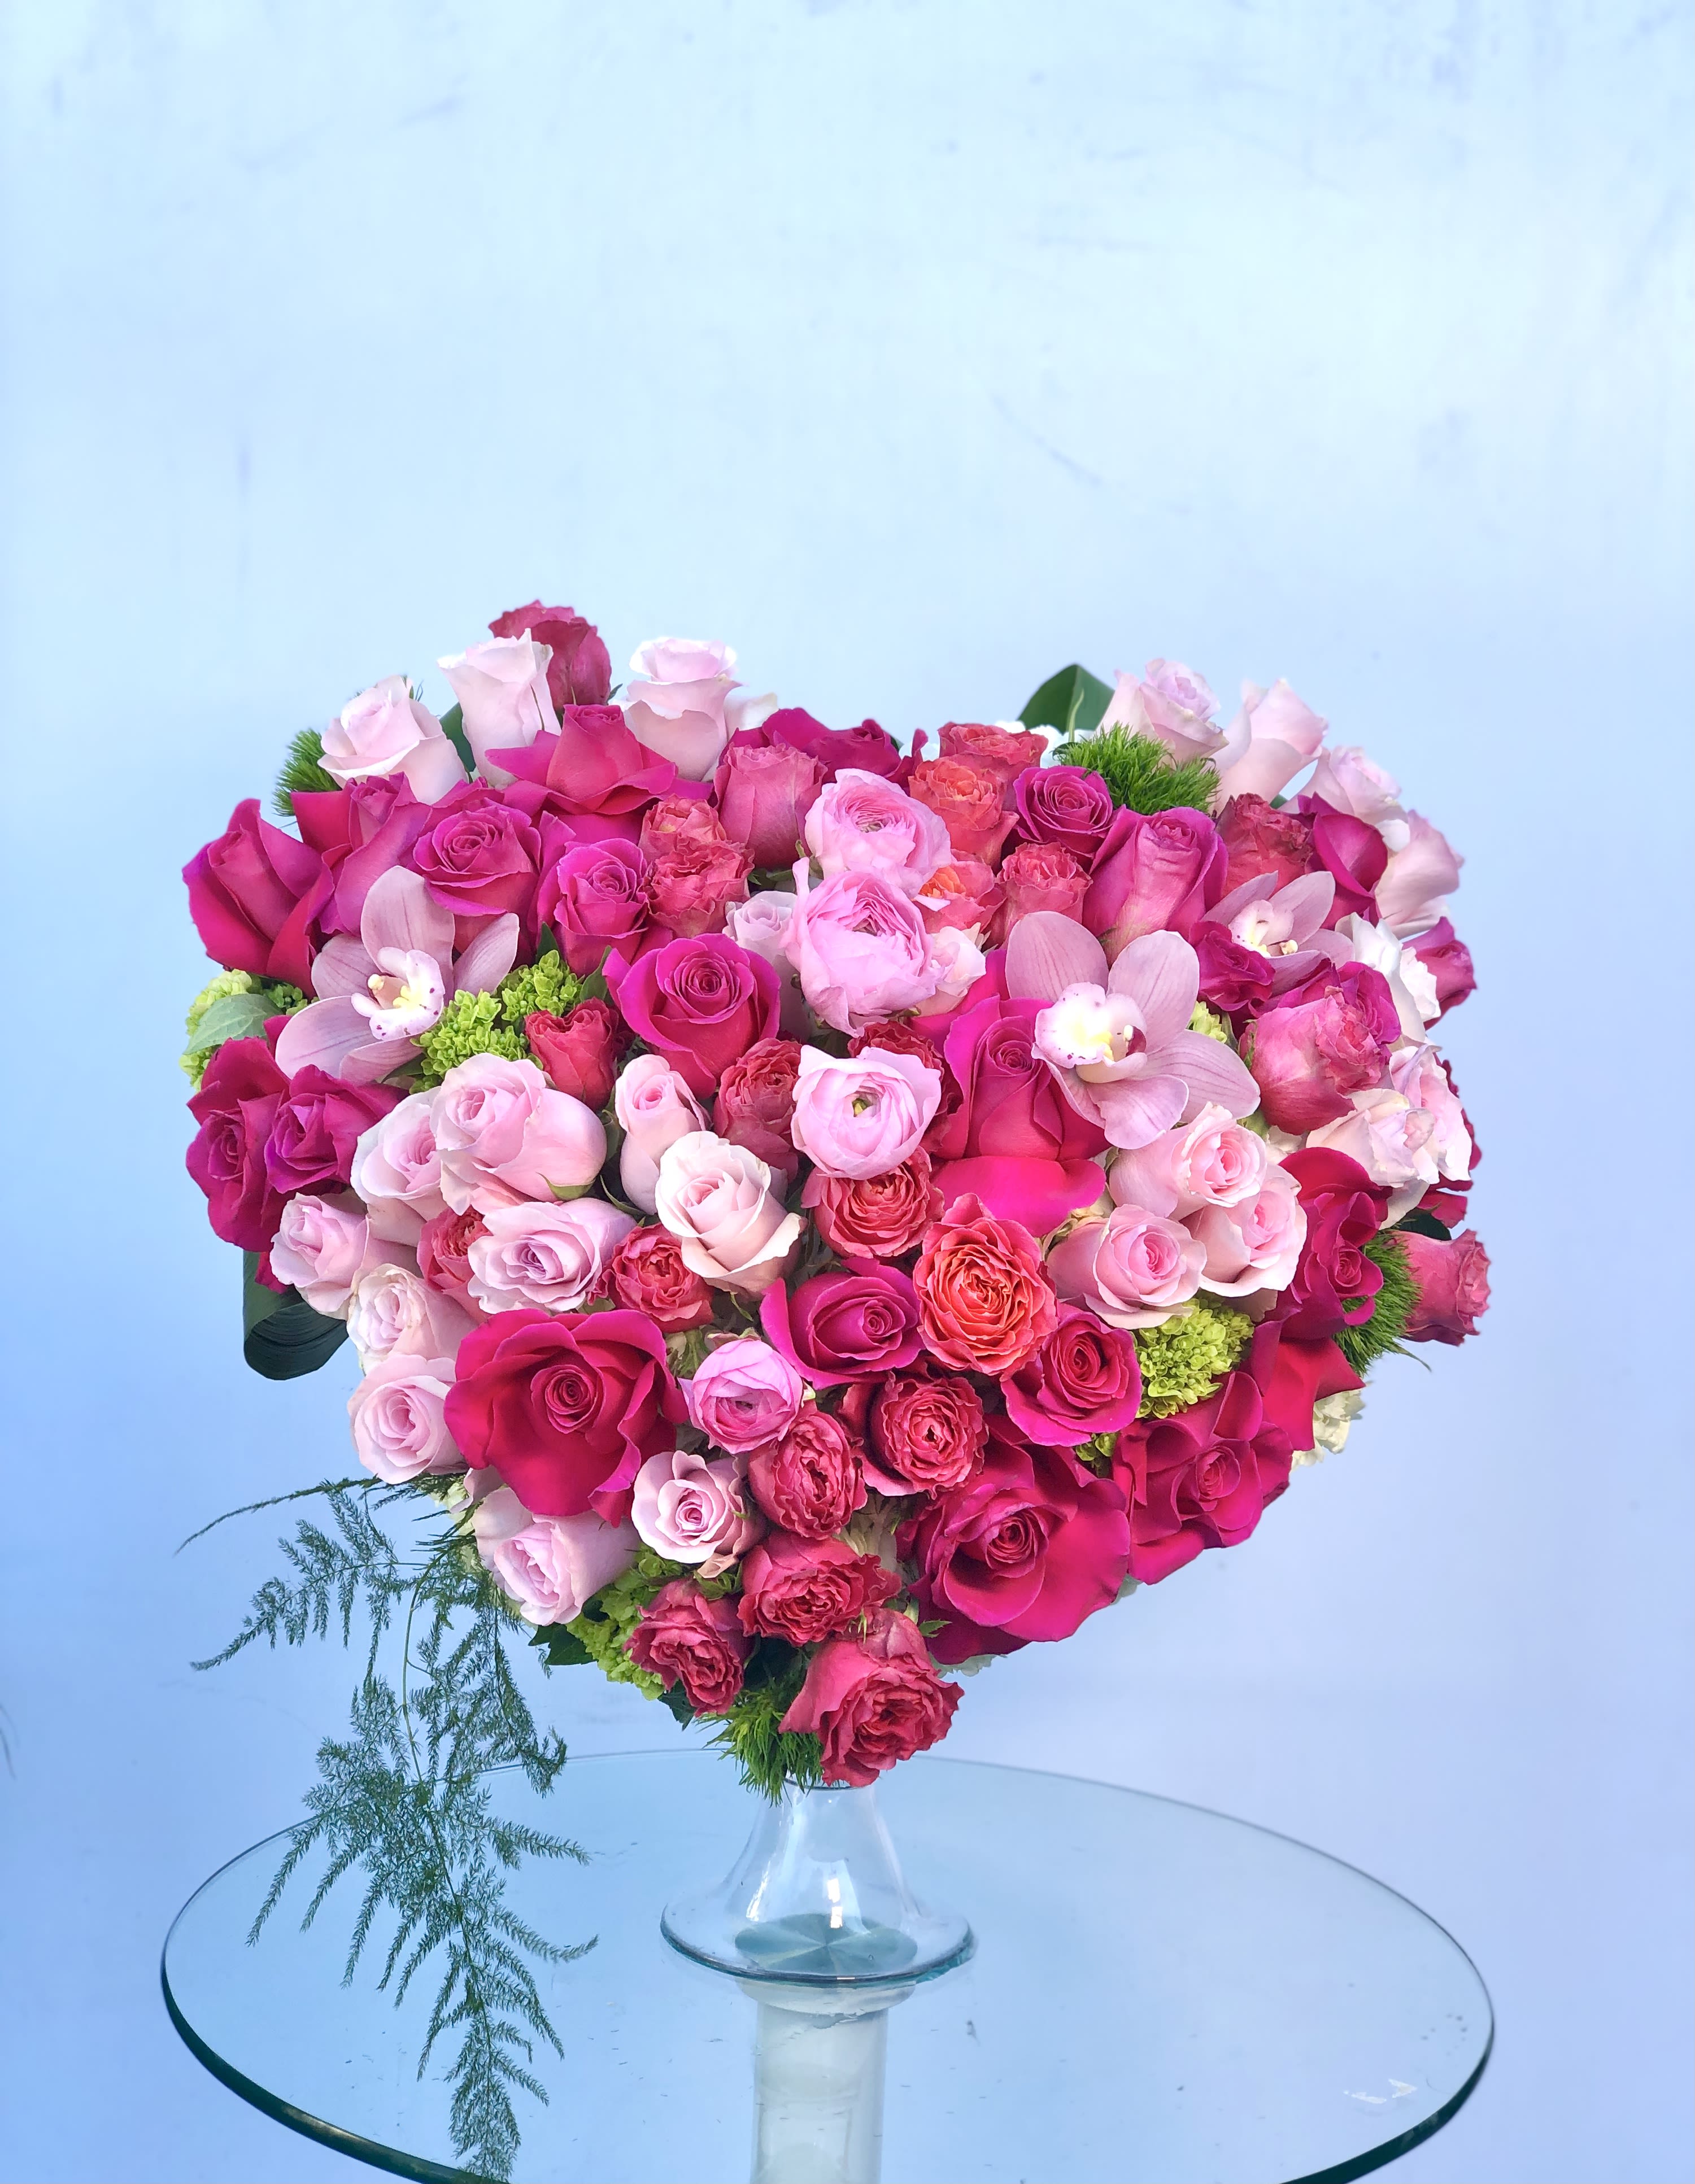 IN LOVE WITH PINK  - pink color roses.  